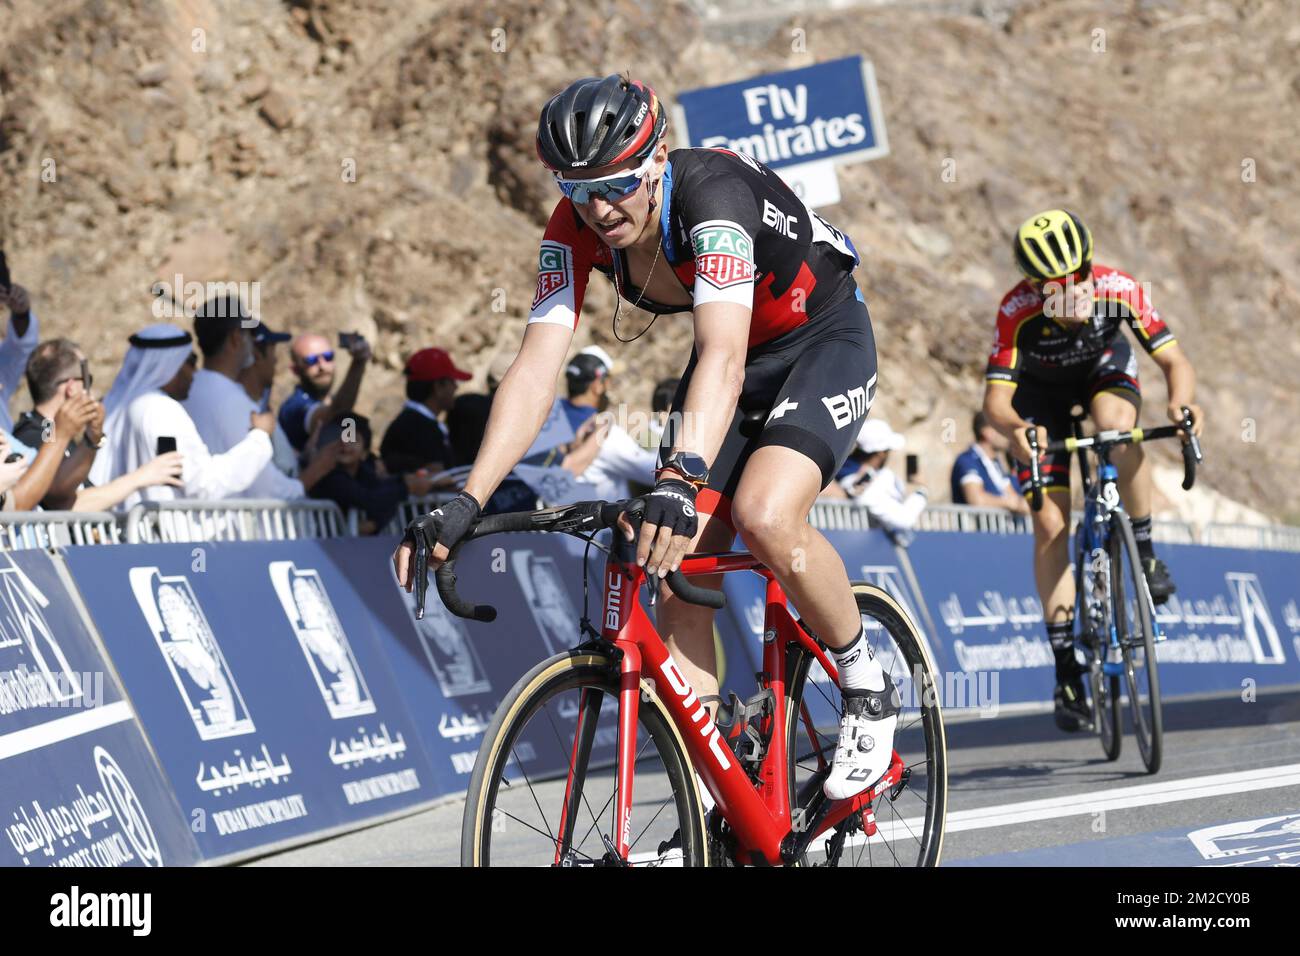 Belgian Dylan Teuns of BMC Racing Team pictured in action during stage 4 of the Dubai Tour 2018 cycling race, 172km from Dubai to Hatta Dam, United Arab Emirates, Friday 09 February 2018. The Dubai Tour 2018 is taking place from 6 to 10 February. BELGA PHOTO YUZURU SUNADA Stock Photo